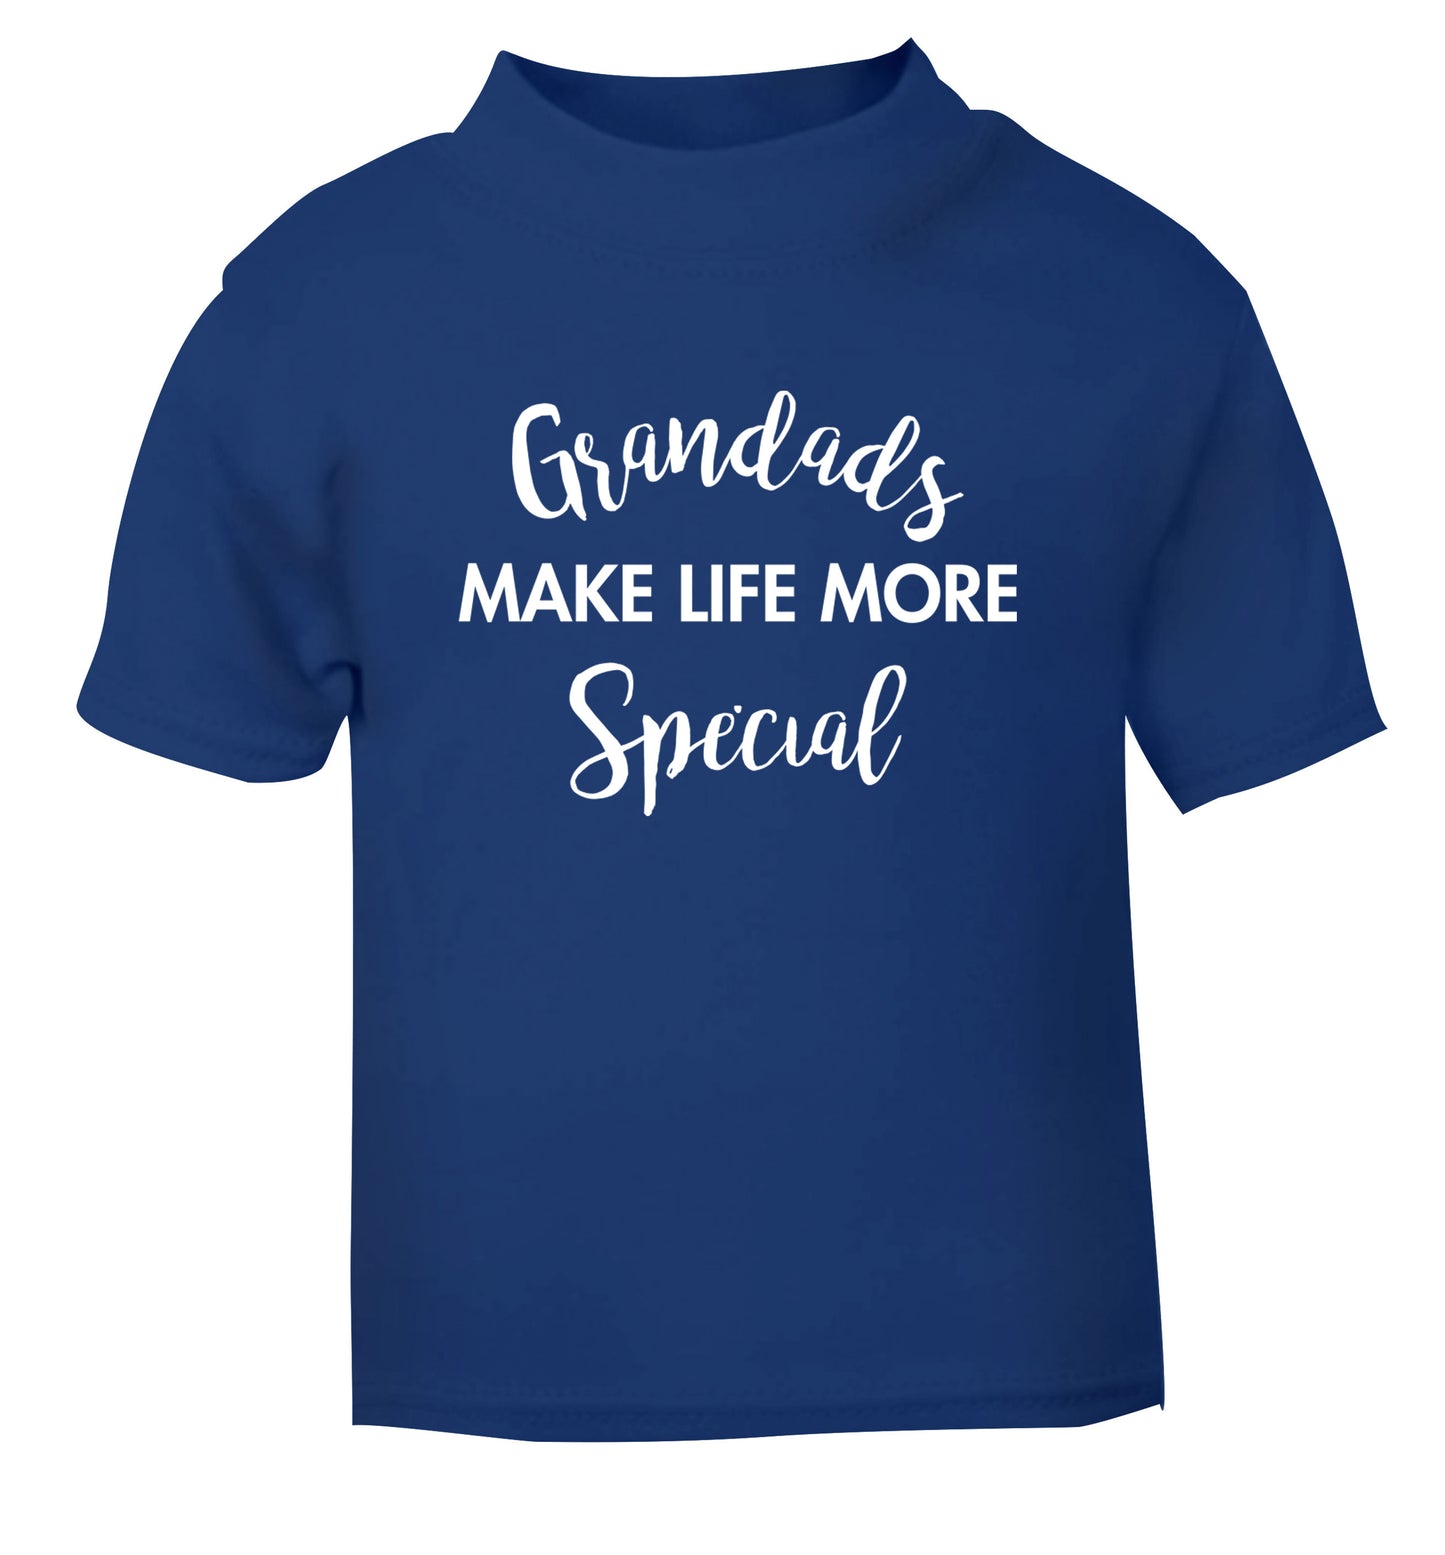 Grandads make life more special blue Baby Toddler Tshirt 2 Years